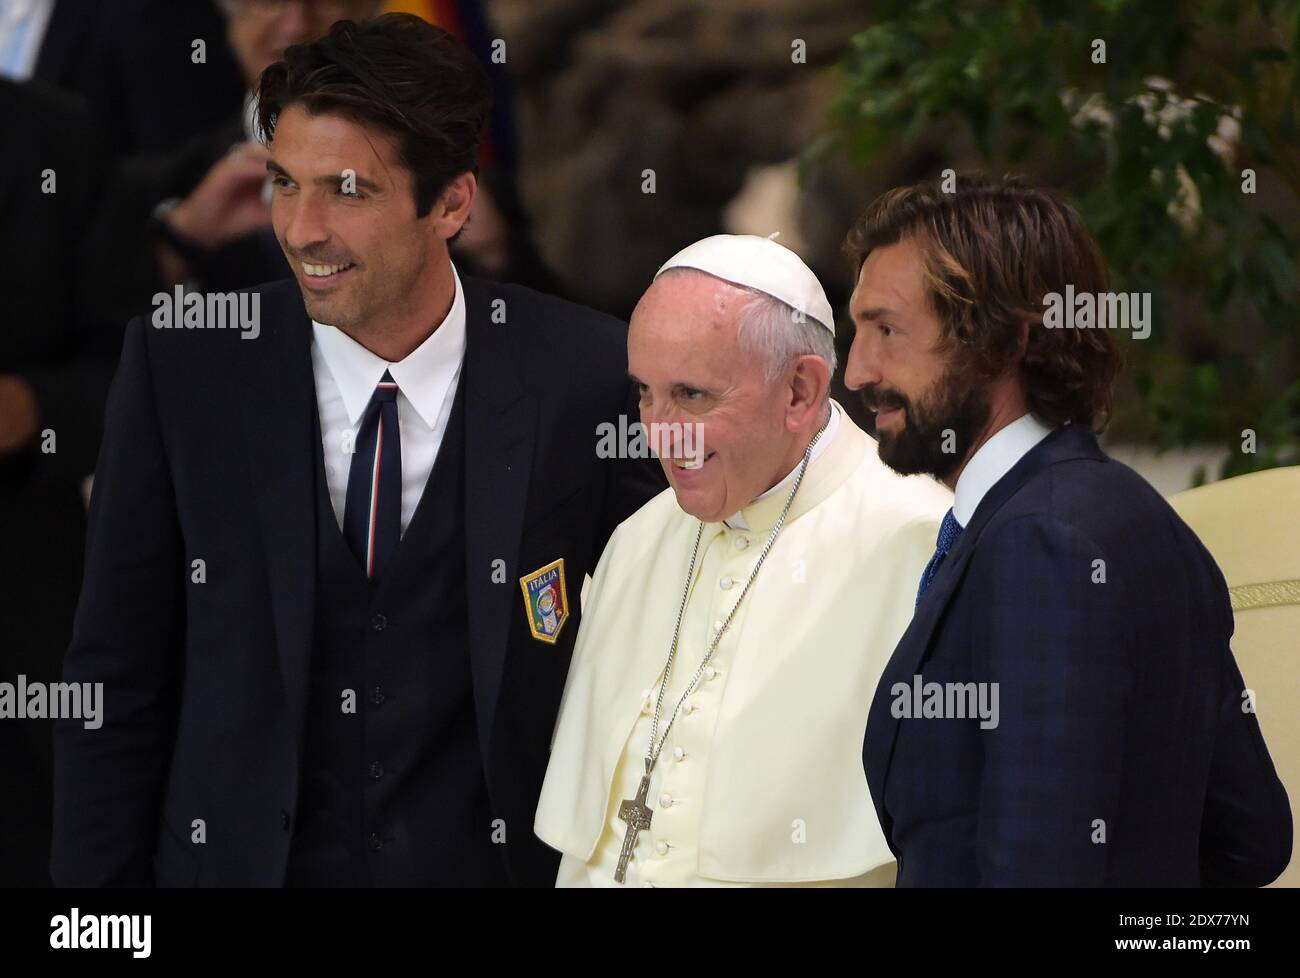 Italian soccer players Gianluigi Buffon and Andrea Pirlo pose with Pope Francis during a special audience at the Vatican on September 1, 2014 for players and organisers of a charity soccer match that was being played in Rome to promote peace and inter-religious cooperation. Pope Francis read an address to the participants in the Vatican's large audience hall and then each of them filed past the pontiff to greet and have their picture taken with him. Maradona chatted with his compatriot longer than most of the others and gave him a light blue-and-white jersey with his Argentine national team nu Stock Photo